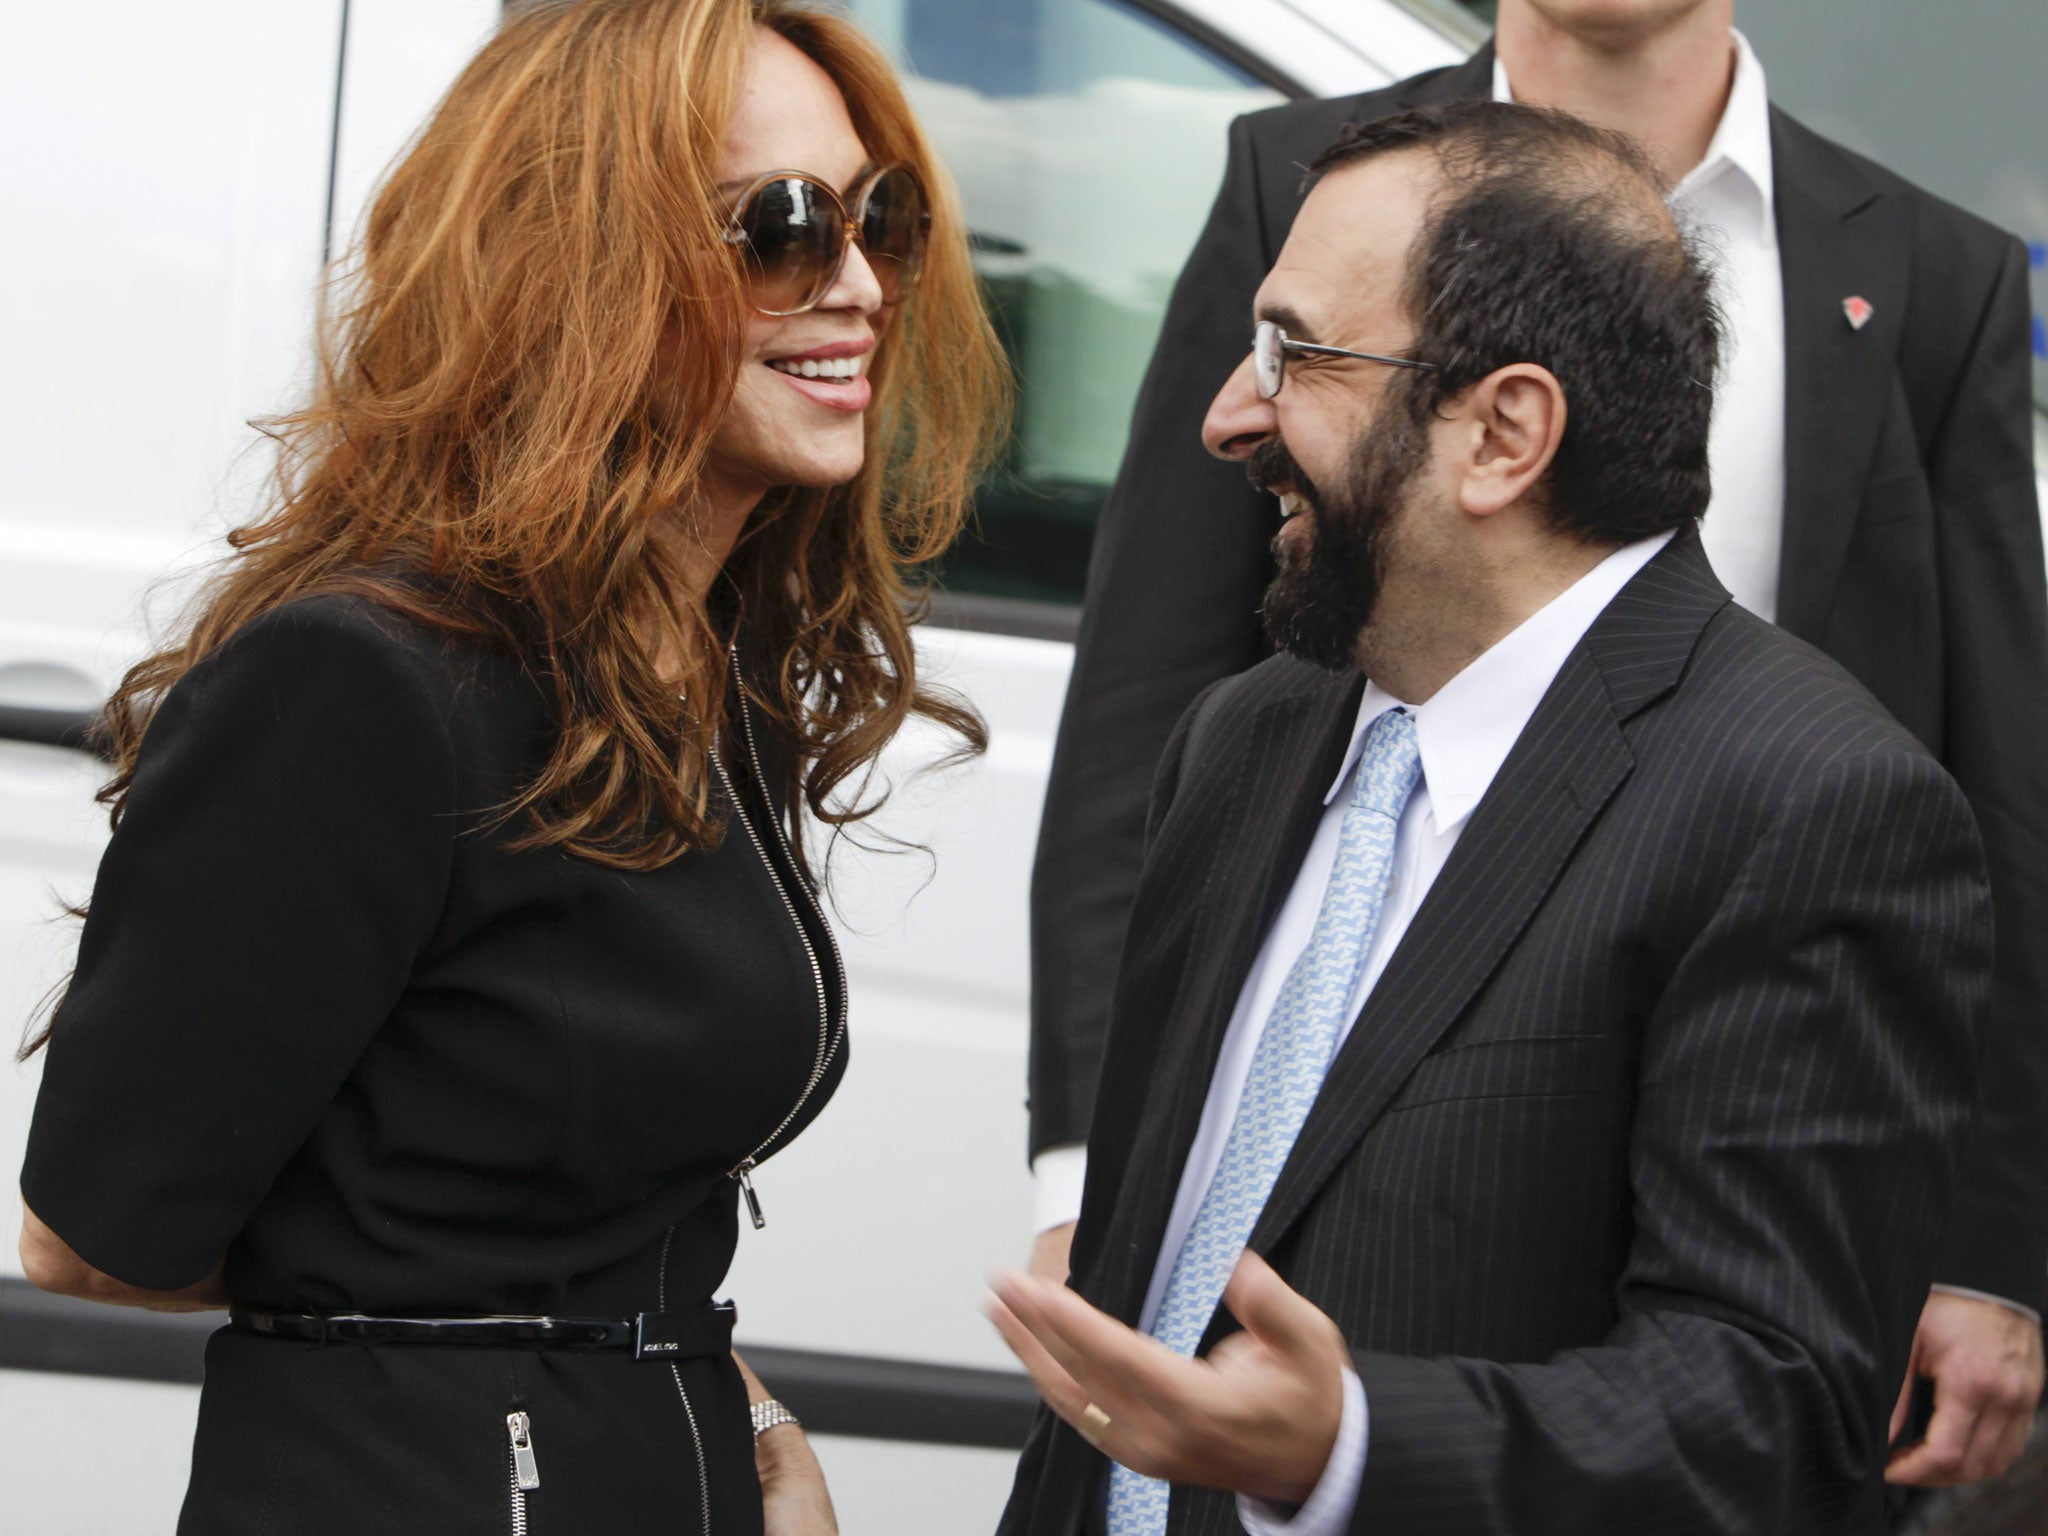 Anti-Ground Zero Mosque campaigners Pamela Geller and Robert Spencer, pictured in 2012, have been barred from entering Britain